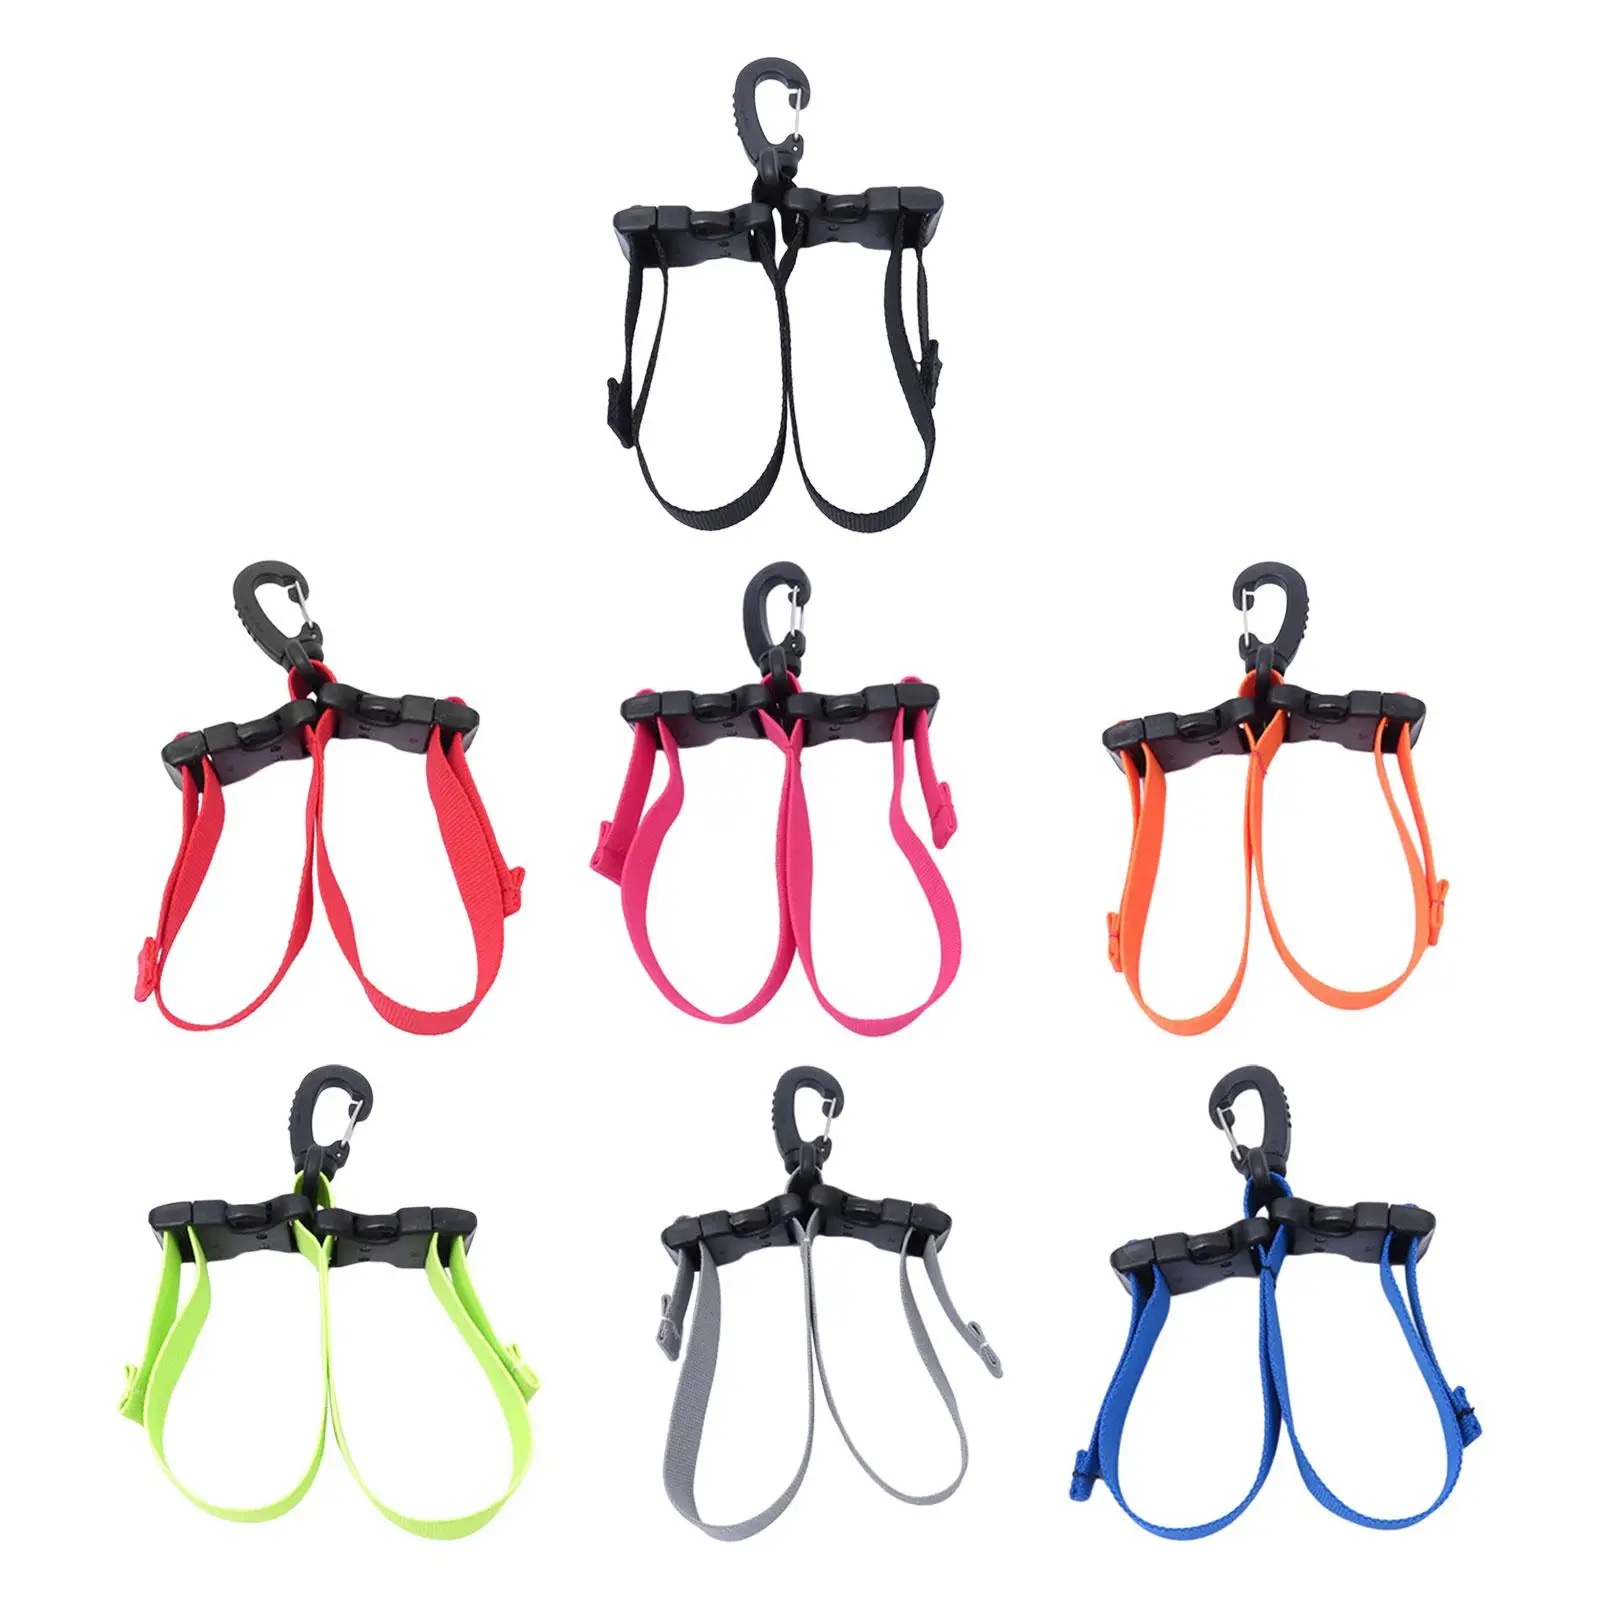 Diving Fins Strap Swim Flippers Buckles Accessories Snorkel Keeper Strap for Freediving Diving Side Mount Adult